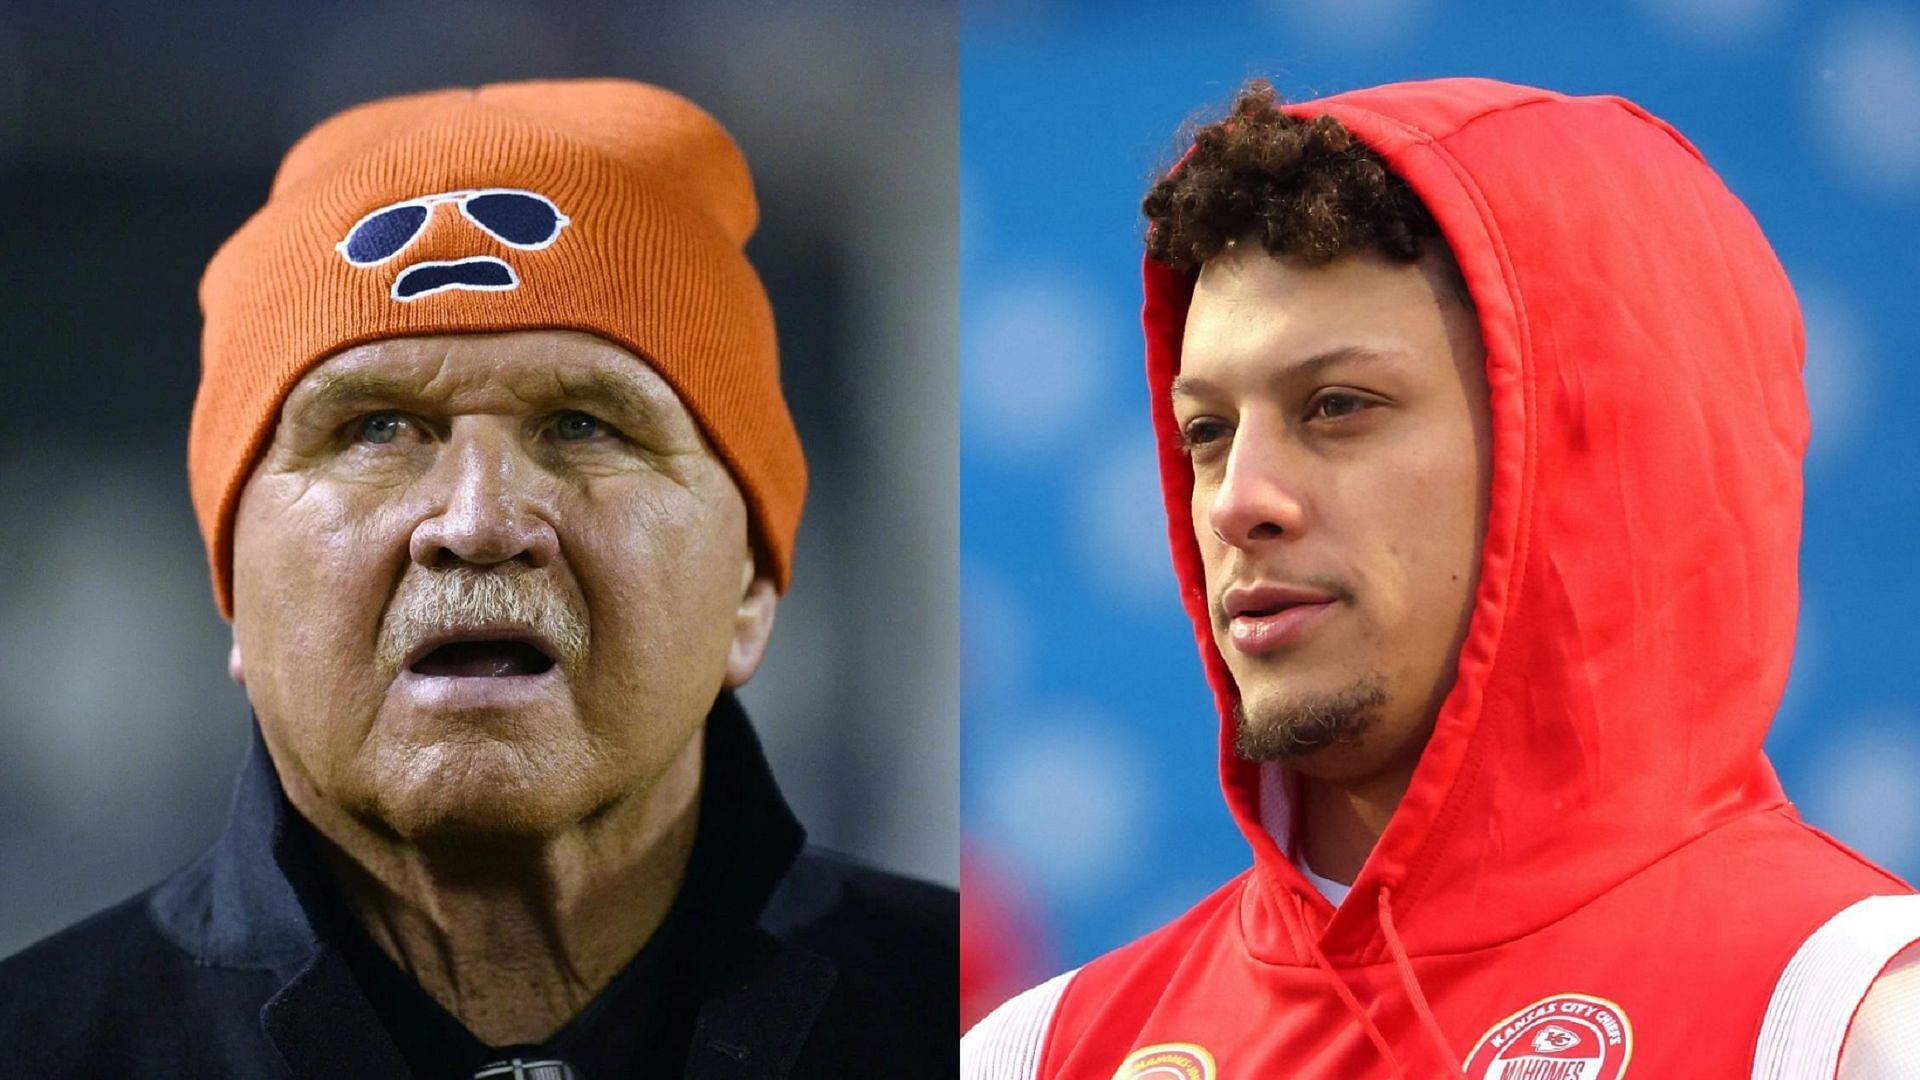 Mike Ditka&rsquo;s &lsquo;85 Bears star scoffs at hypothetical matchup against Patrick Mahomes